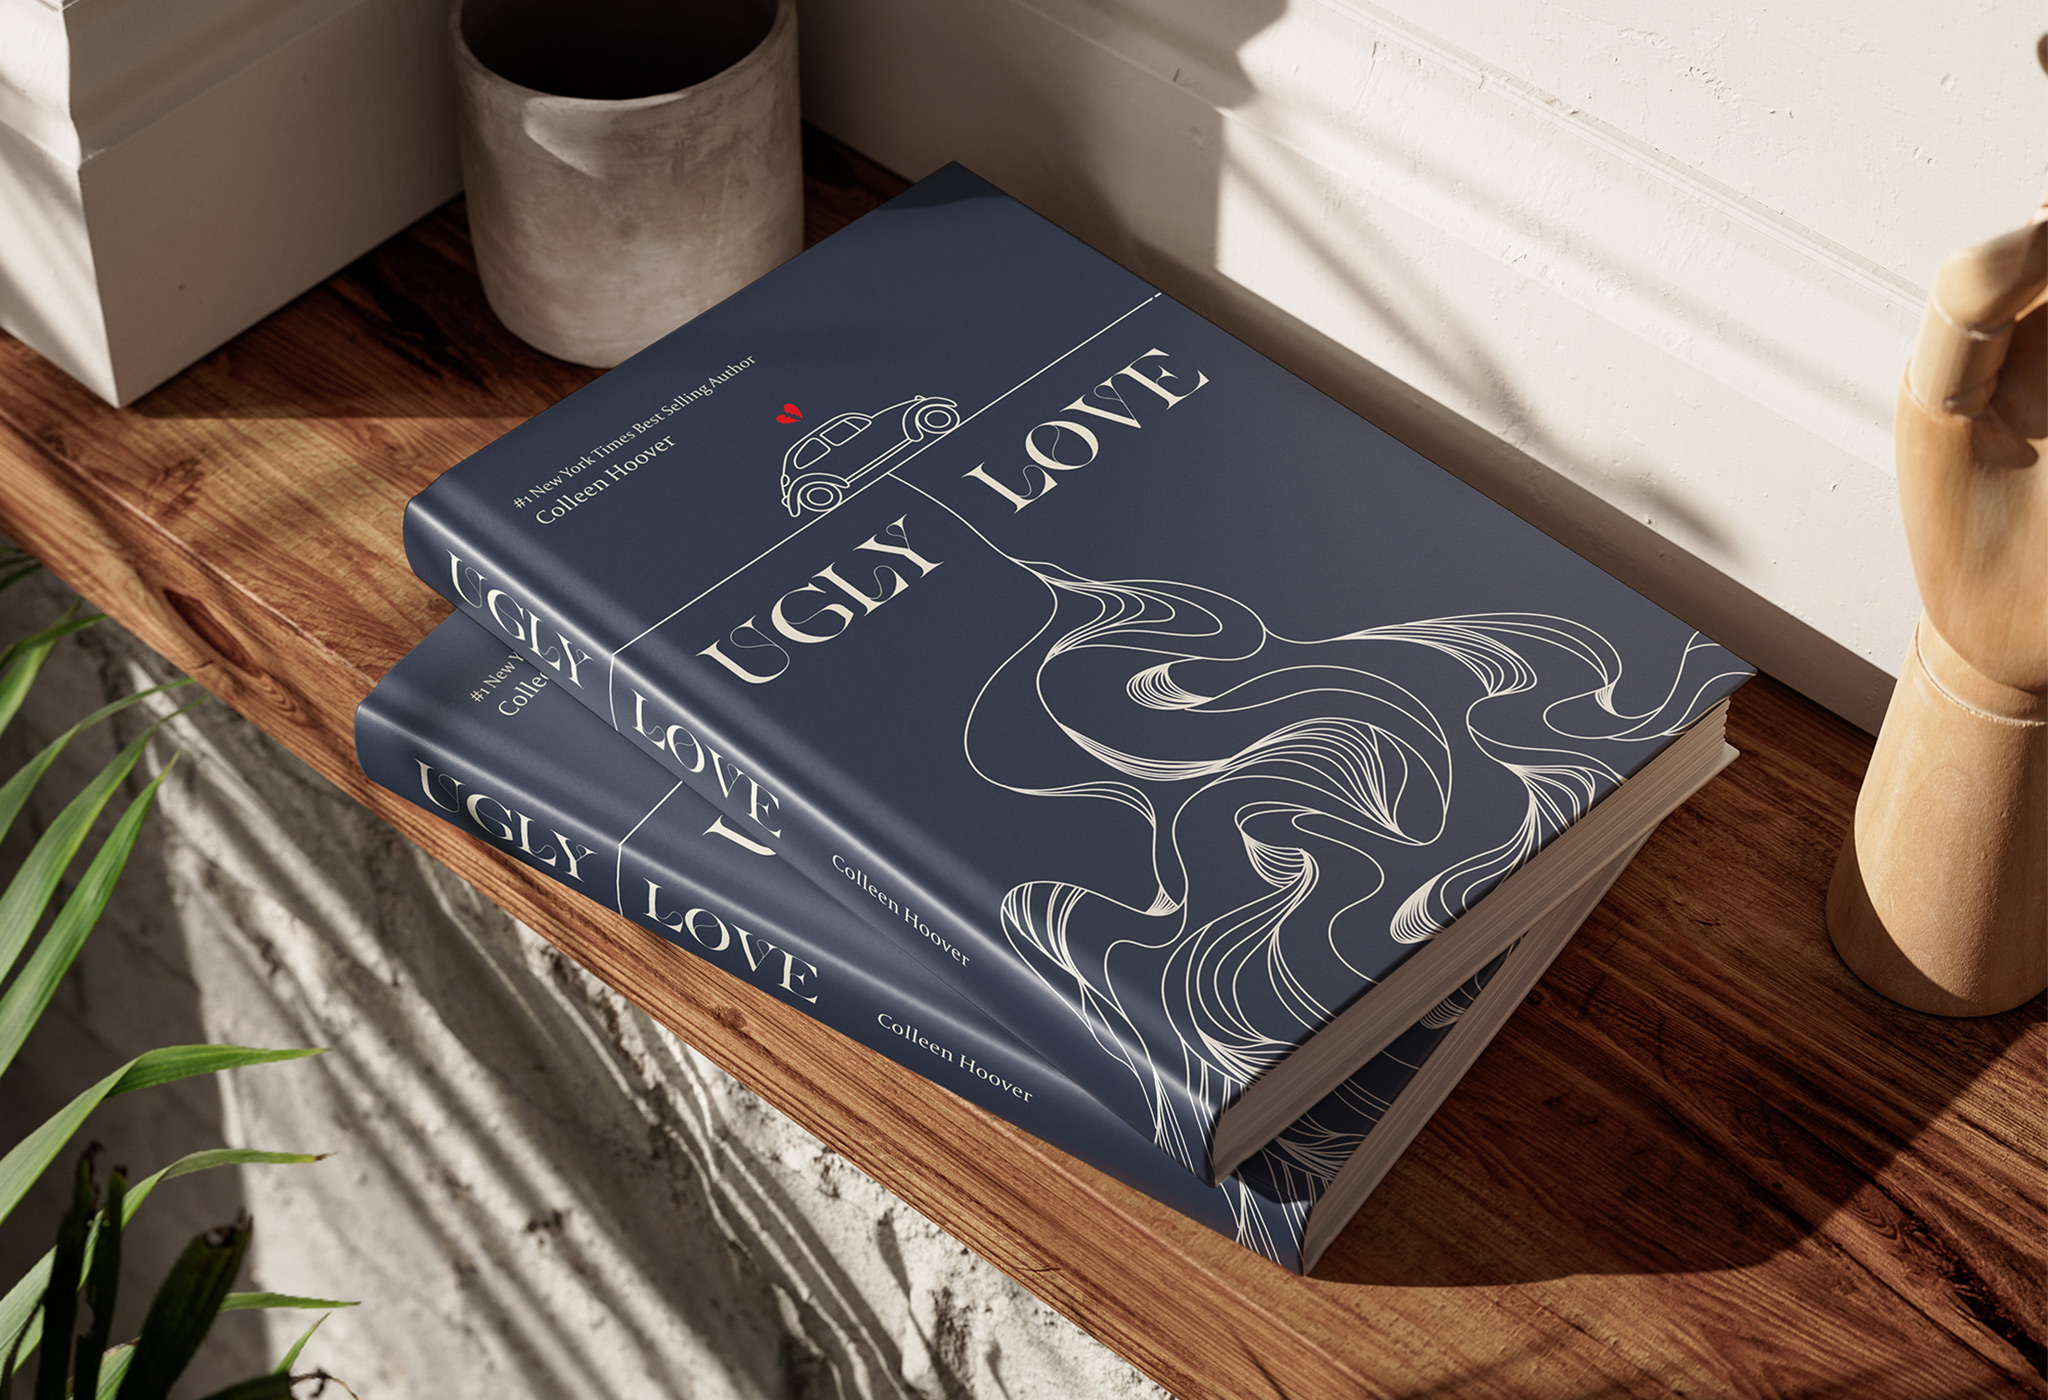 Ugly Love cover mockup, providing a clear view of the fine illustrations and typographic choices.